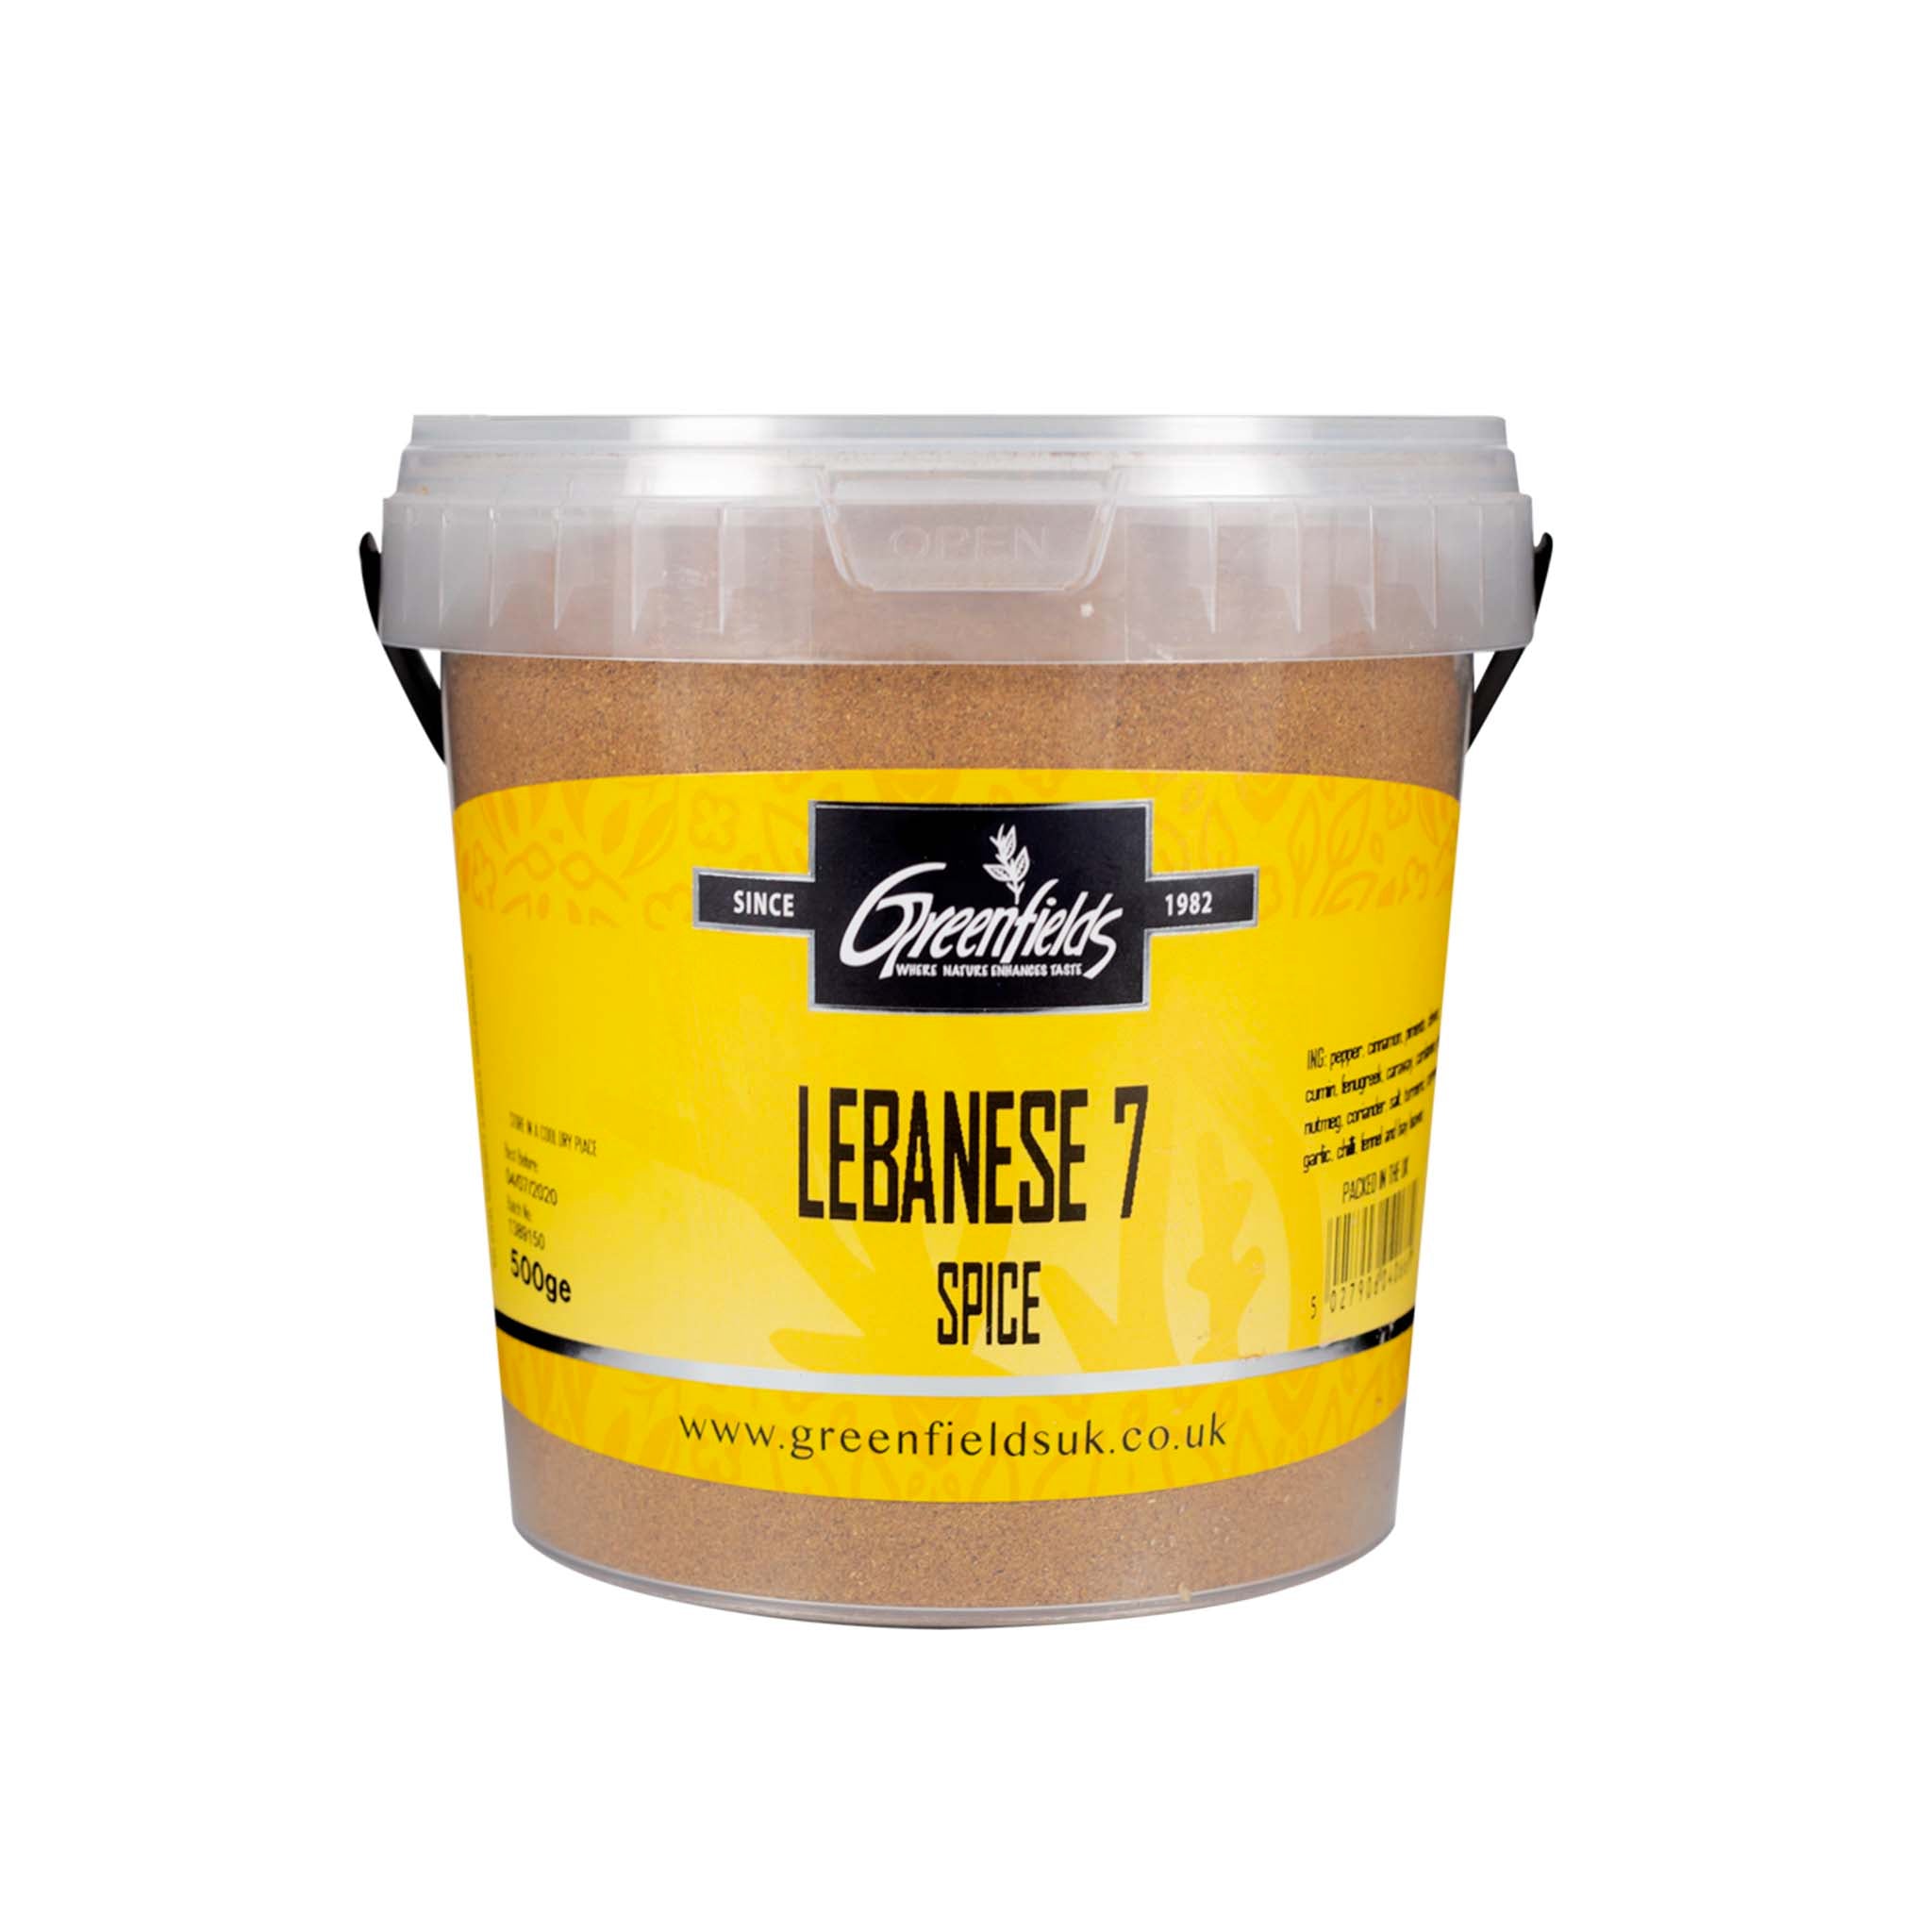 Greenfields Lebanese 7 Spice Catering Size Ingredients Herbs & Spices Catering Size Herbs & Spices